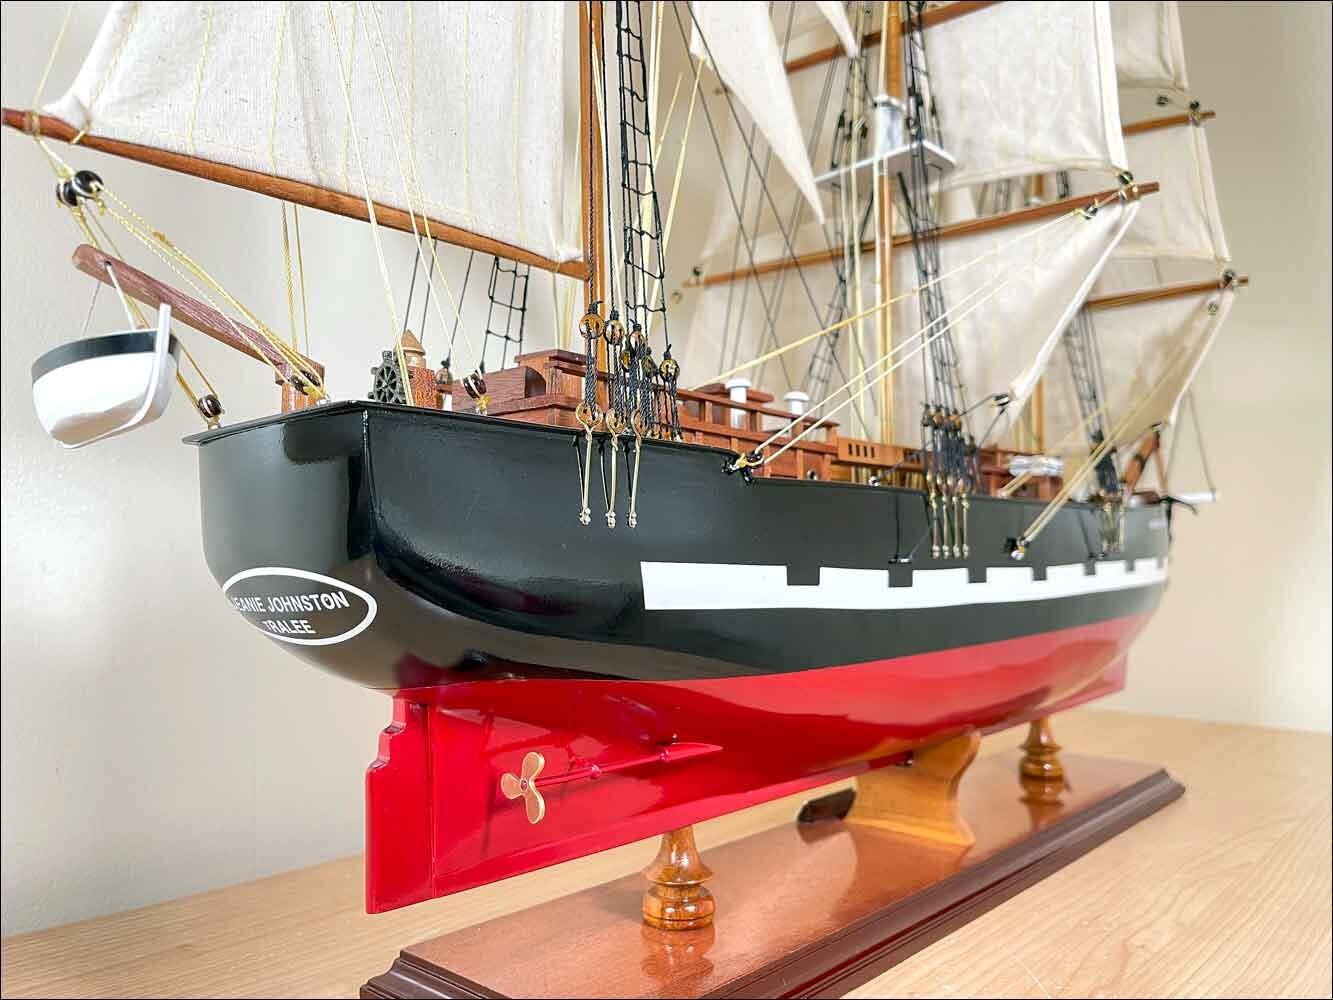 Handcrafted ship model made of wood